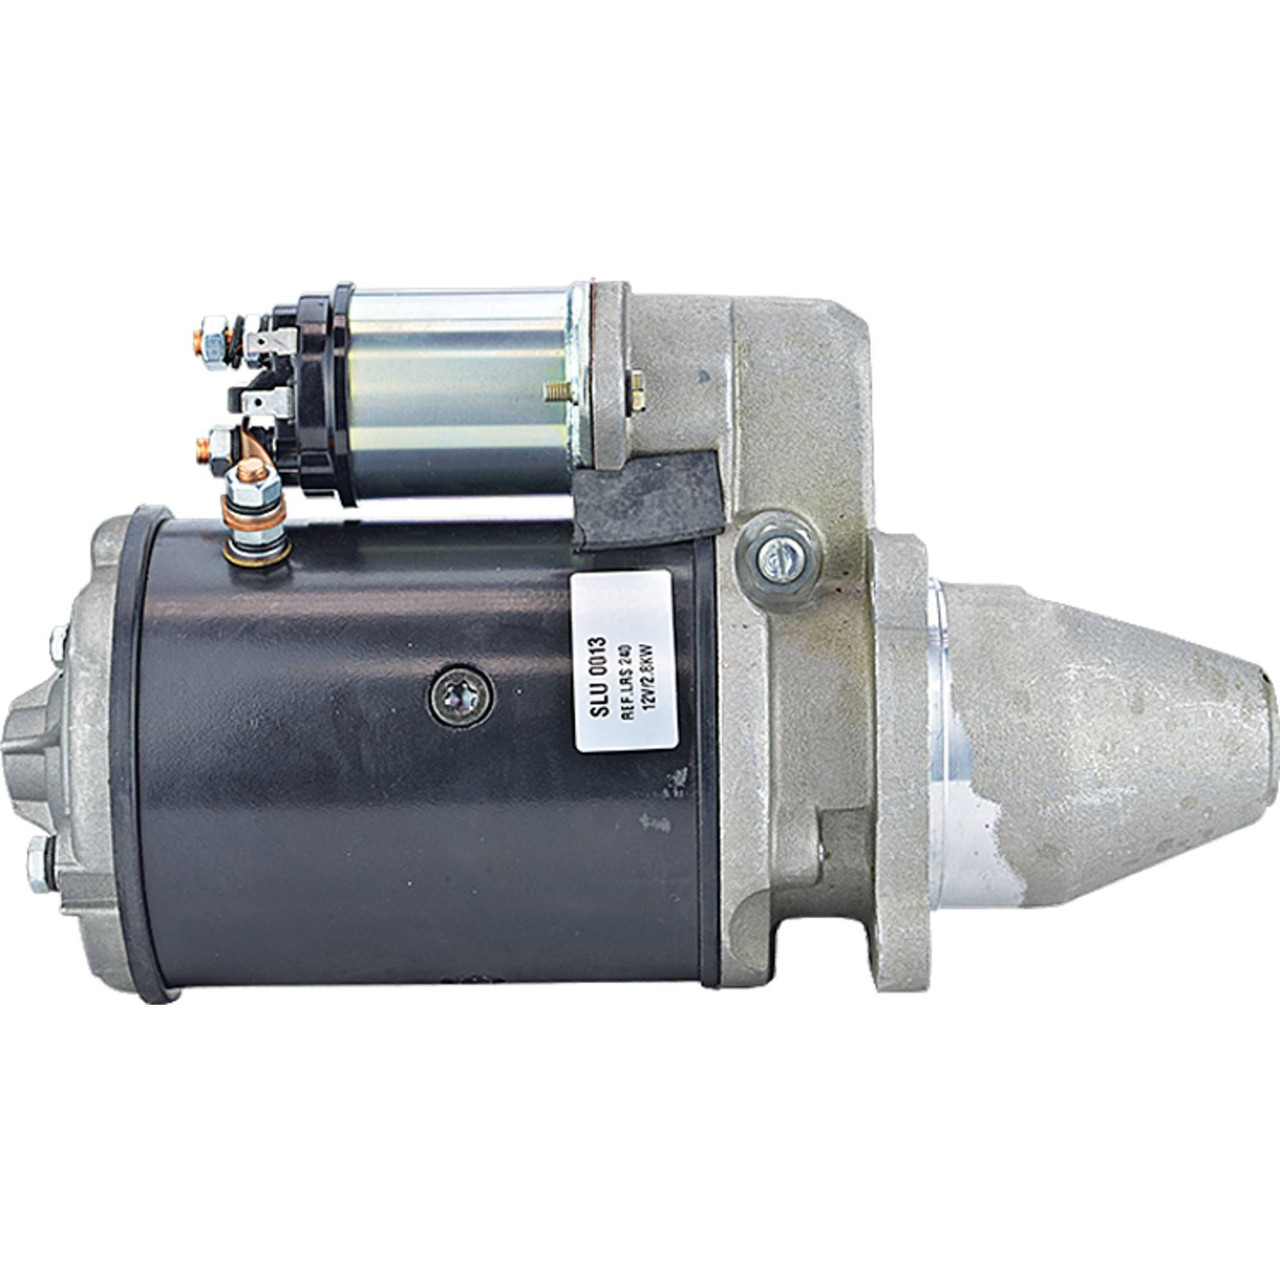 DB Electrical Starter for International 474 1973 1700-0100, HH189330 410-30042